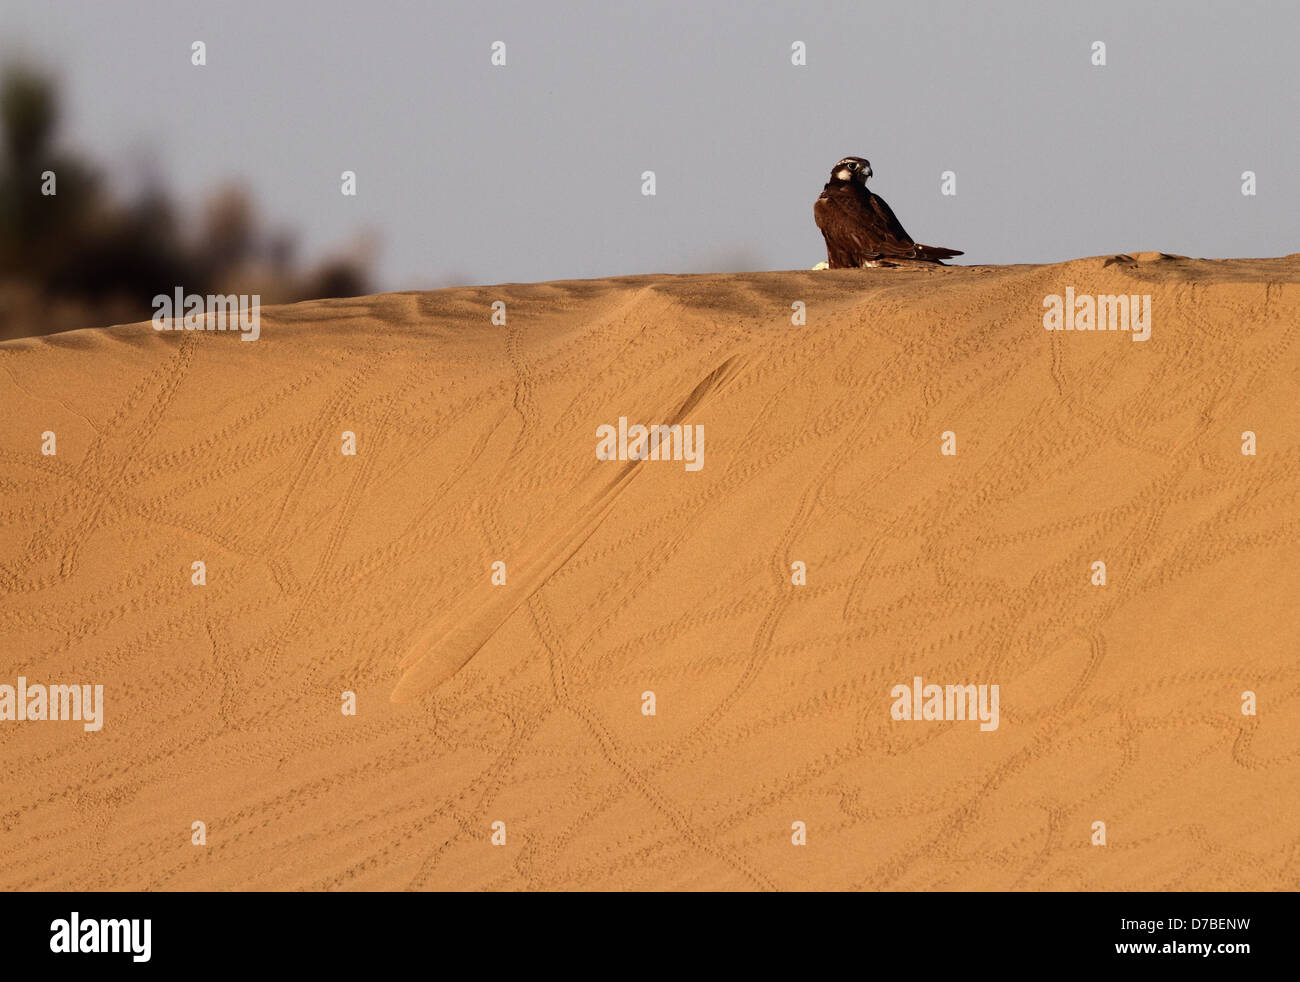 A falcon on a nature's canvas Stock Photo